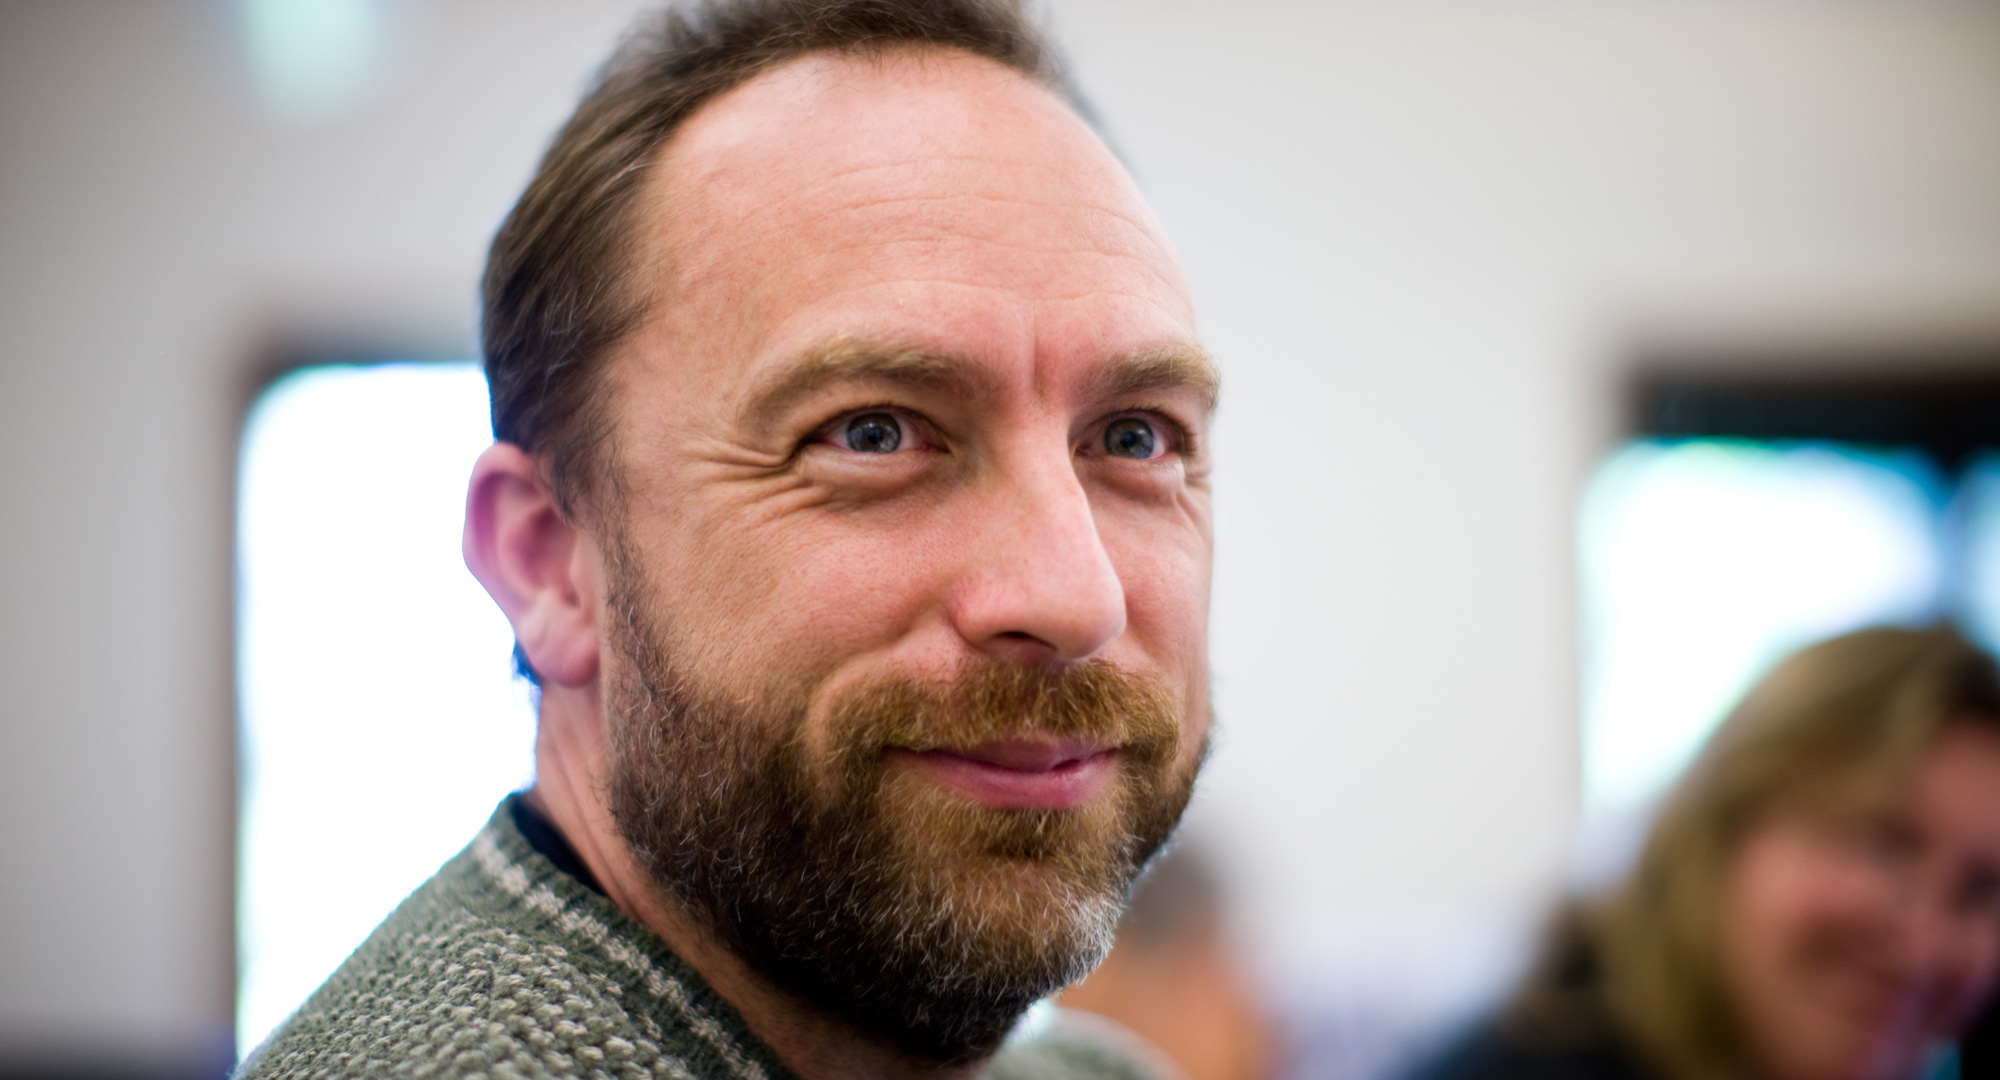 JimmyWales